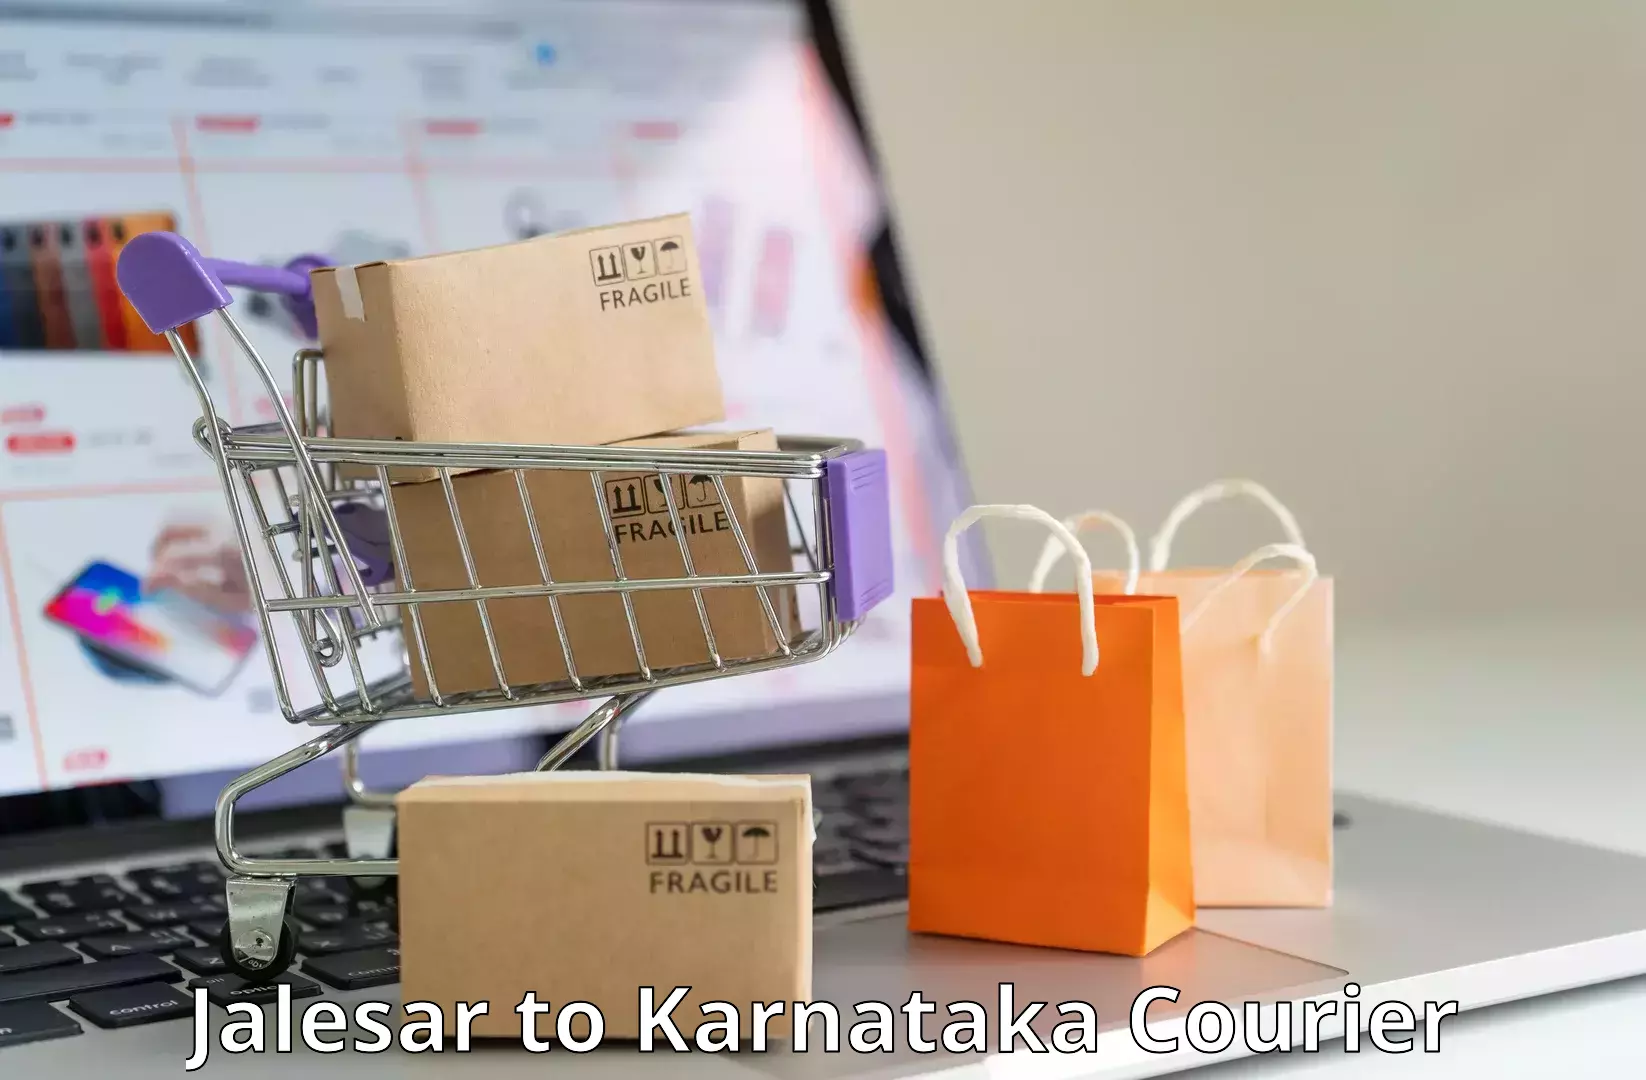 Next-day freight services Jalesar to Indian Institute of Science Bangalore